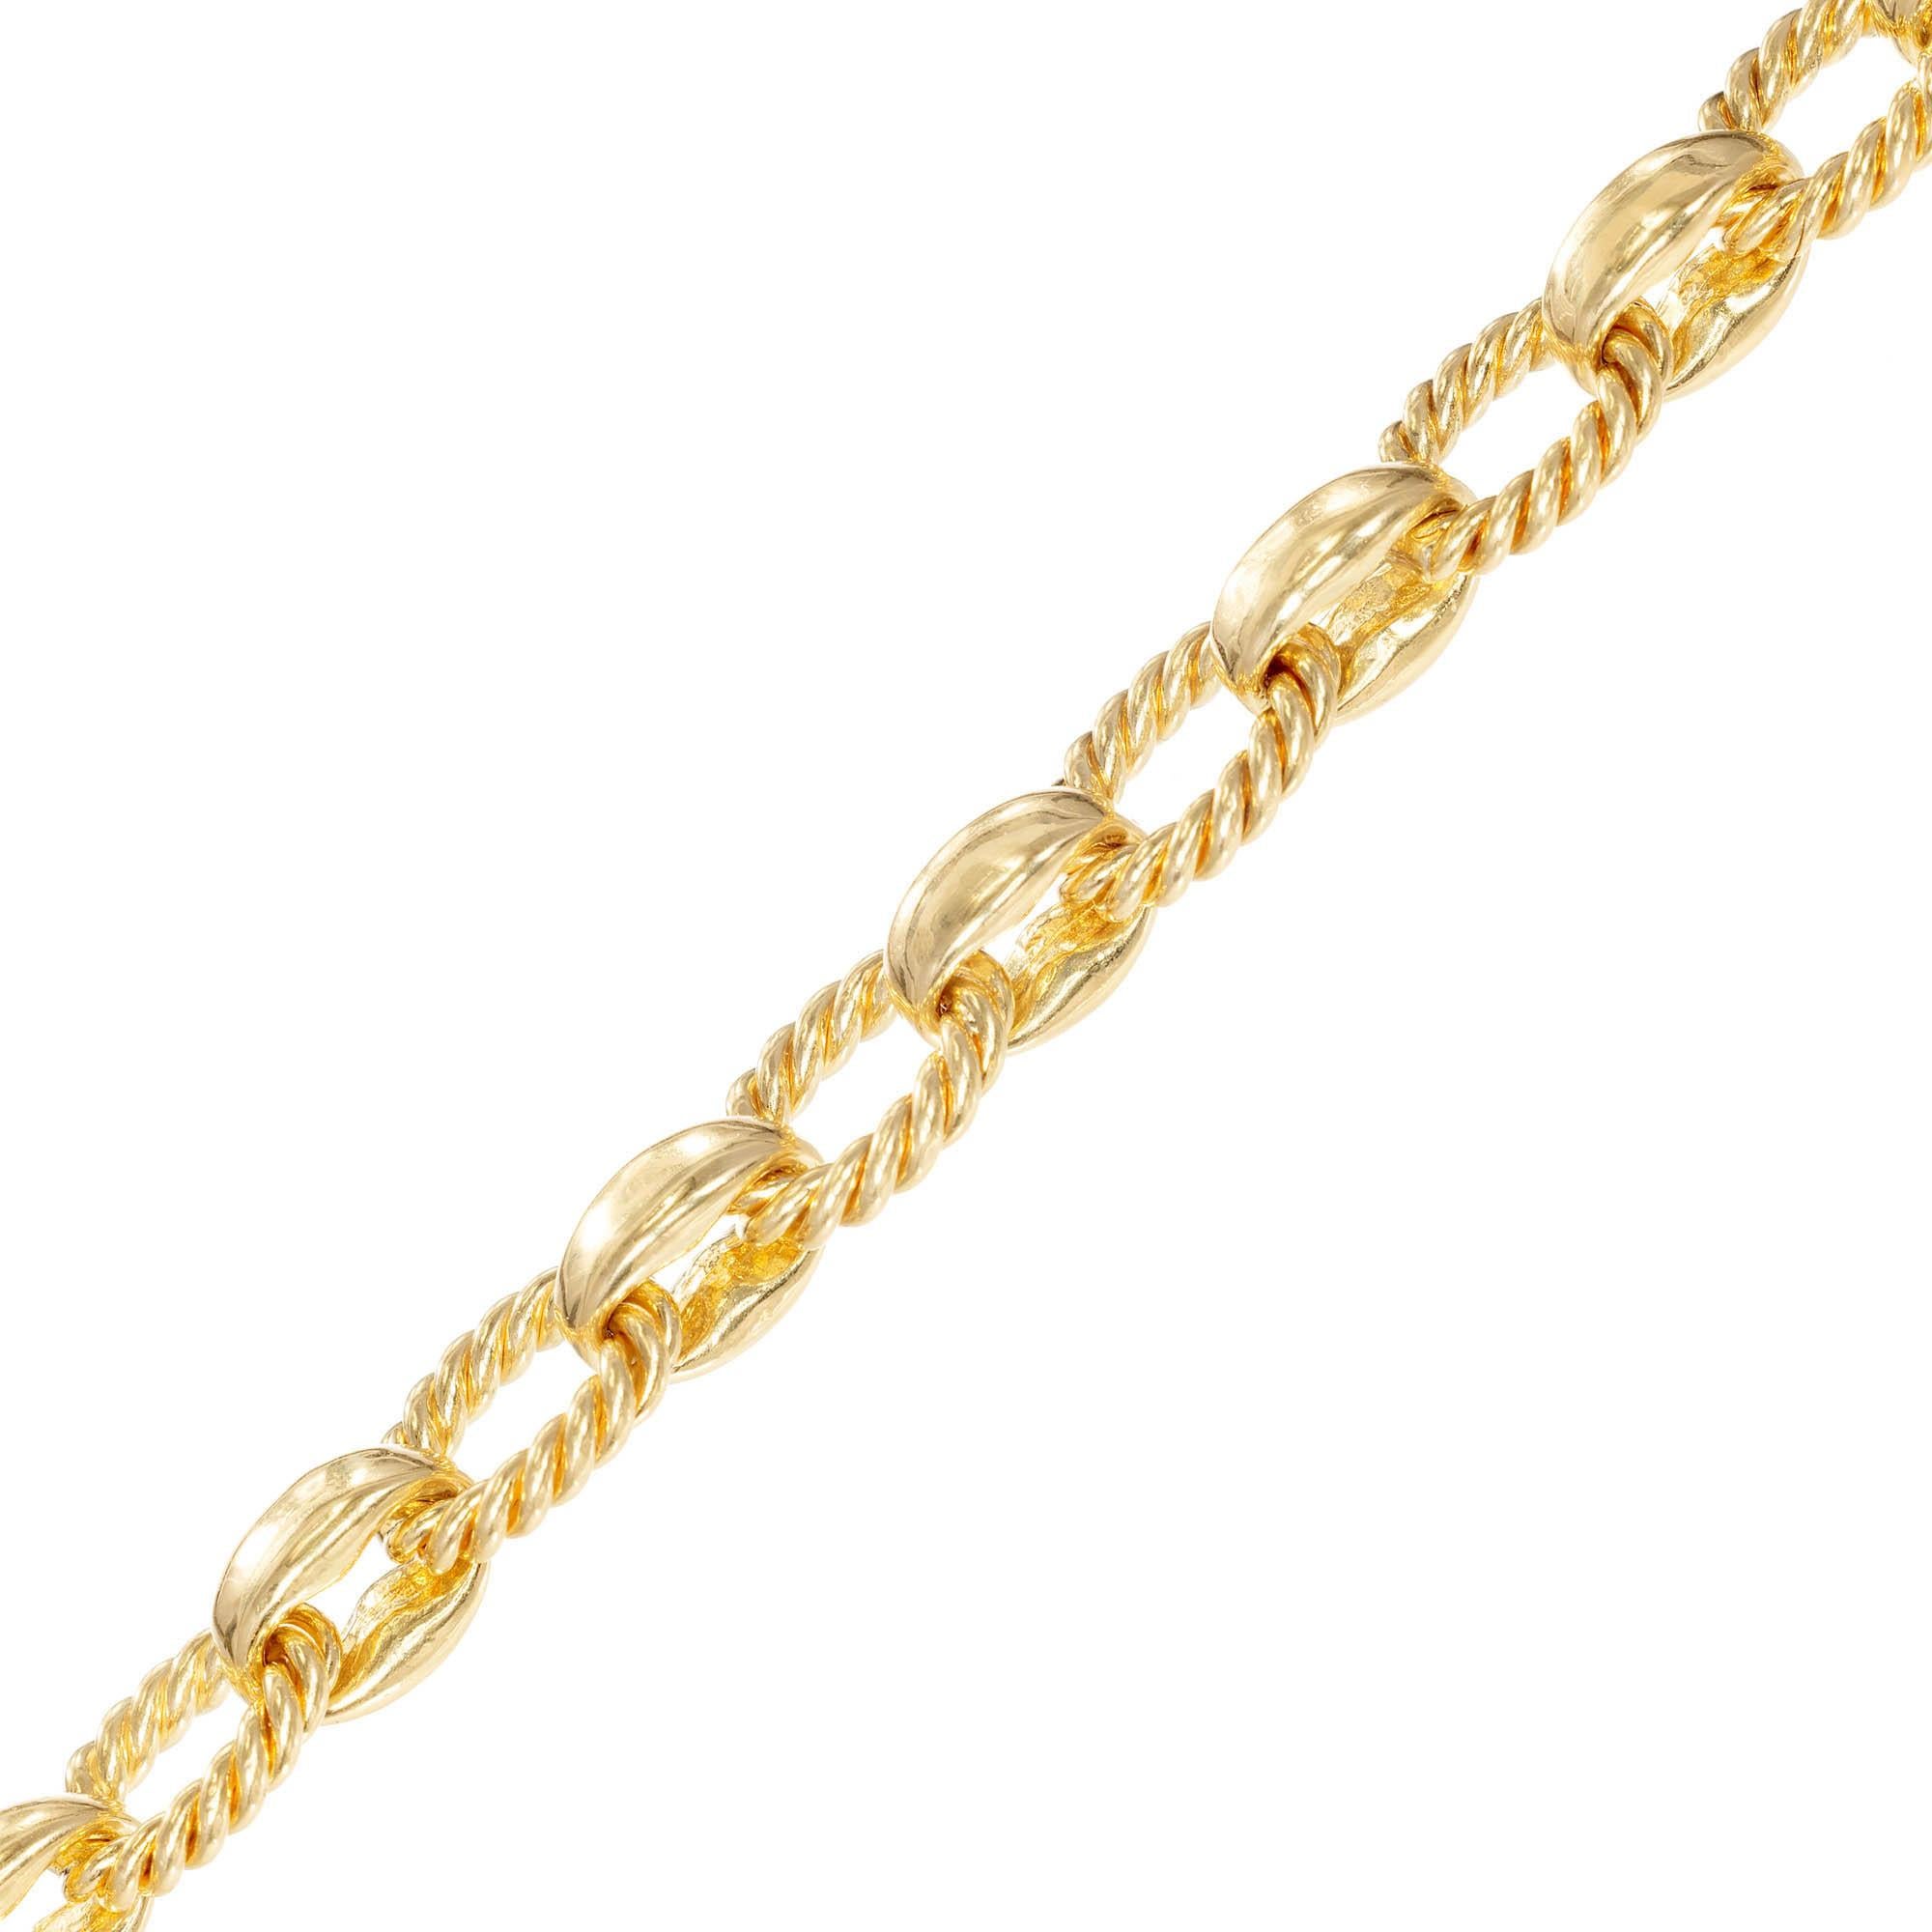 Peter Suchy Fancy link chain in 18k corrugated oval links fastened by narrower high polish links for 24 ½ Inch total with a lobster catch. 

18k Yellow gold
Stamped: 750
102.1 Grams
Bracelet/Chain: 24 ½ Inches
Width: 8.45mm
Thickness/Depth: 6.61
